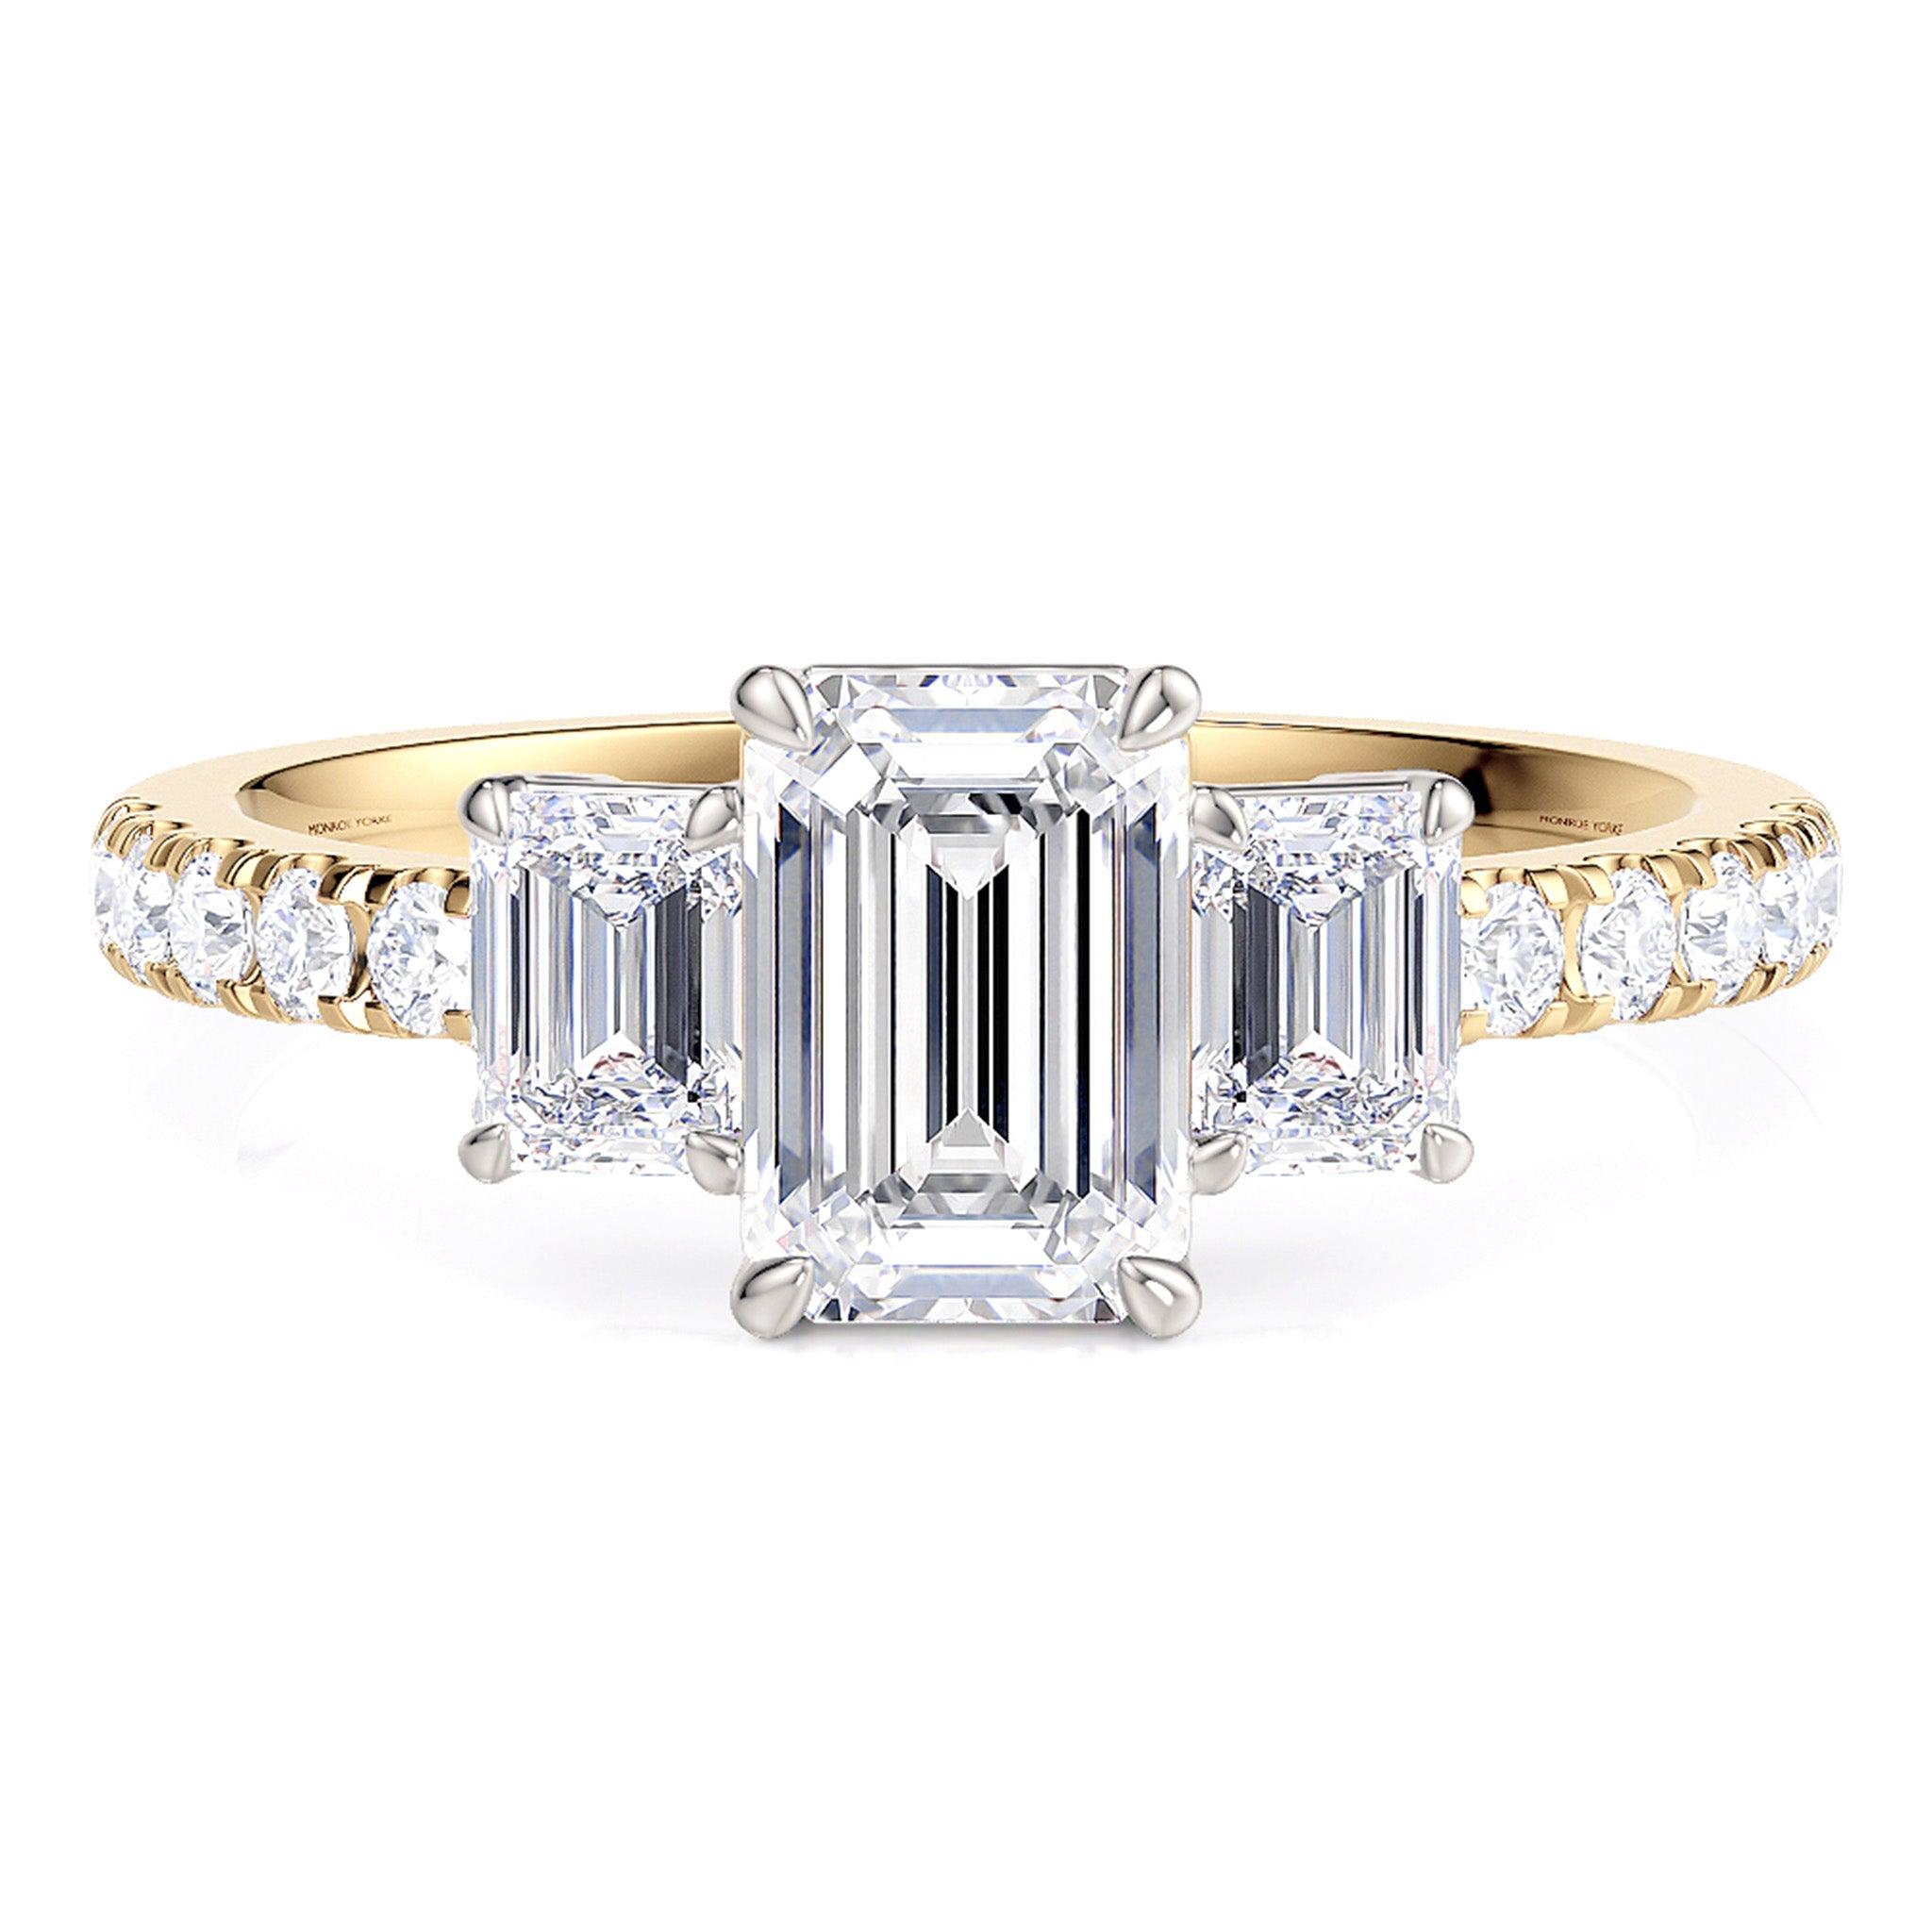 Aspen emerald cut diamond three stone ring with diamonds on the band. 18ct gold band and white gold centre setting